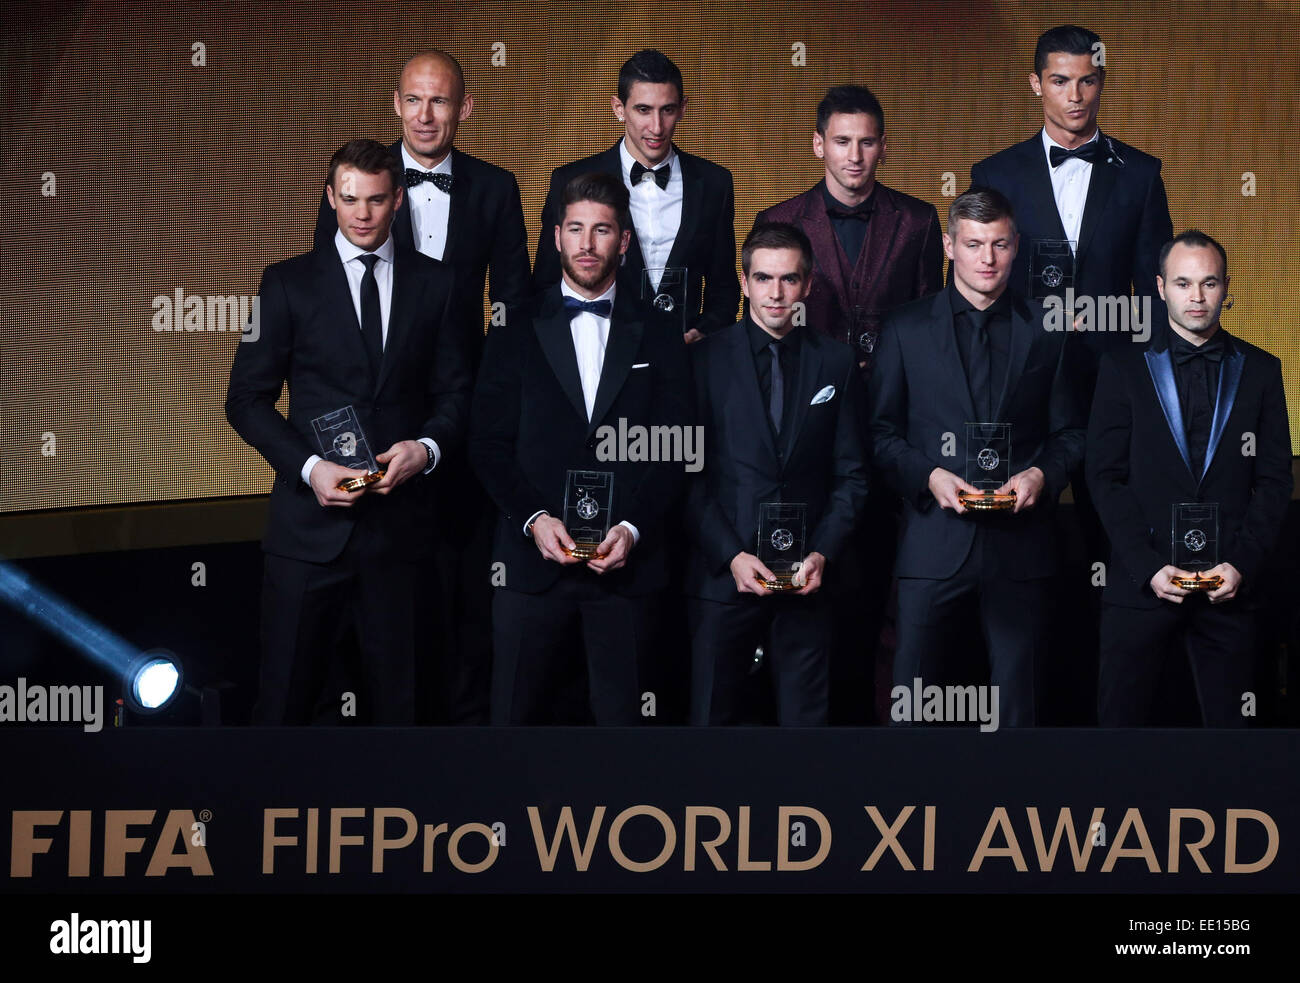 Zurich, Switzerland. 12th Jan, 2015. Winners of the FIFA FIFPro WORLD XI Award of the year 2014: Manuel Neuer, Sergio Ramos, Philipp Lahm, Toni Kroos and Andres Iniesta(first row L to R), Arjen Robben, Angel Di Maria, Lionel Messi and Cristiano Ronaldo(back row L to R), pose with their trophies during the FIFA Ballon d'Or award ceremony at the Kongresshaus in Zurich, Switzerland, Jan. 12, 2015. Credit:  Zhang Fan/Xinhua/Alamy Live News Stock Photo